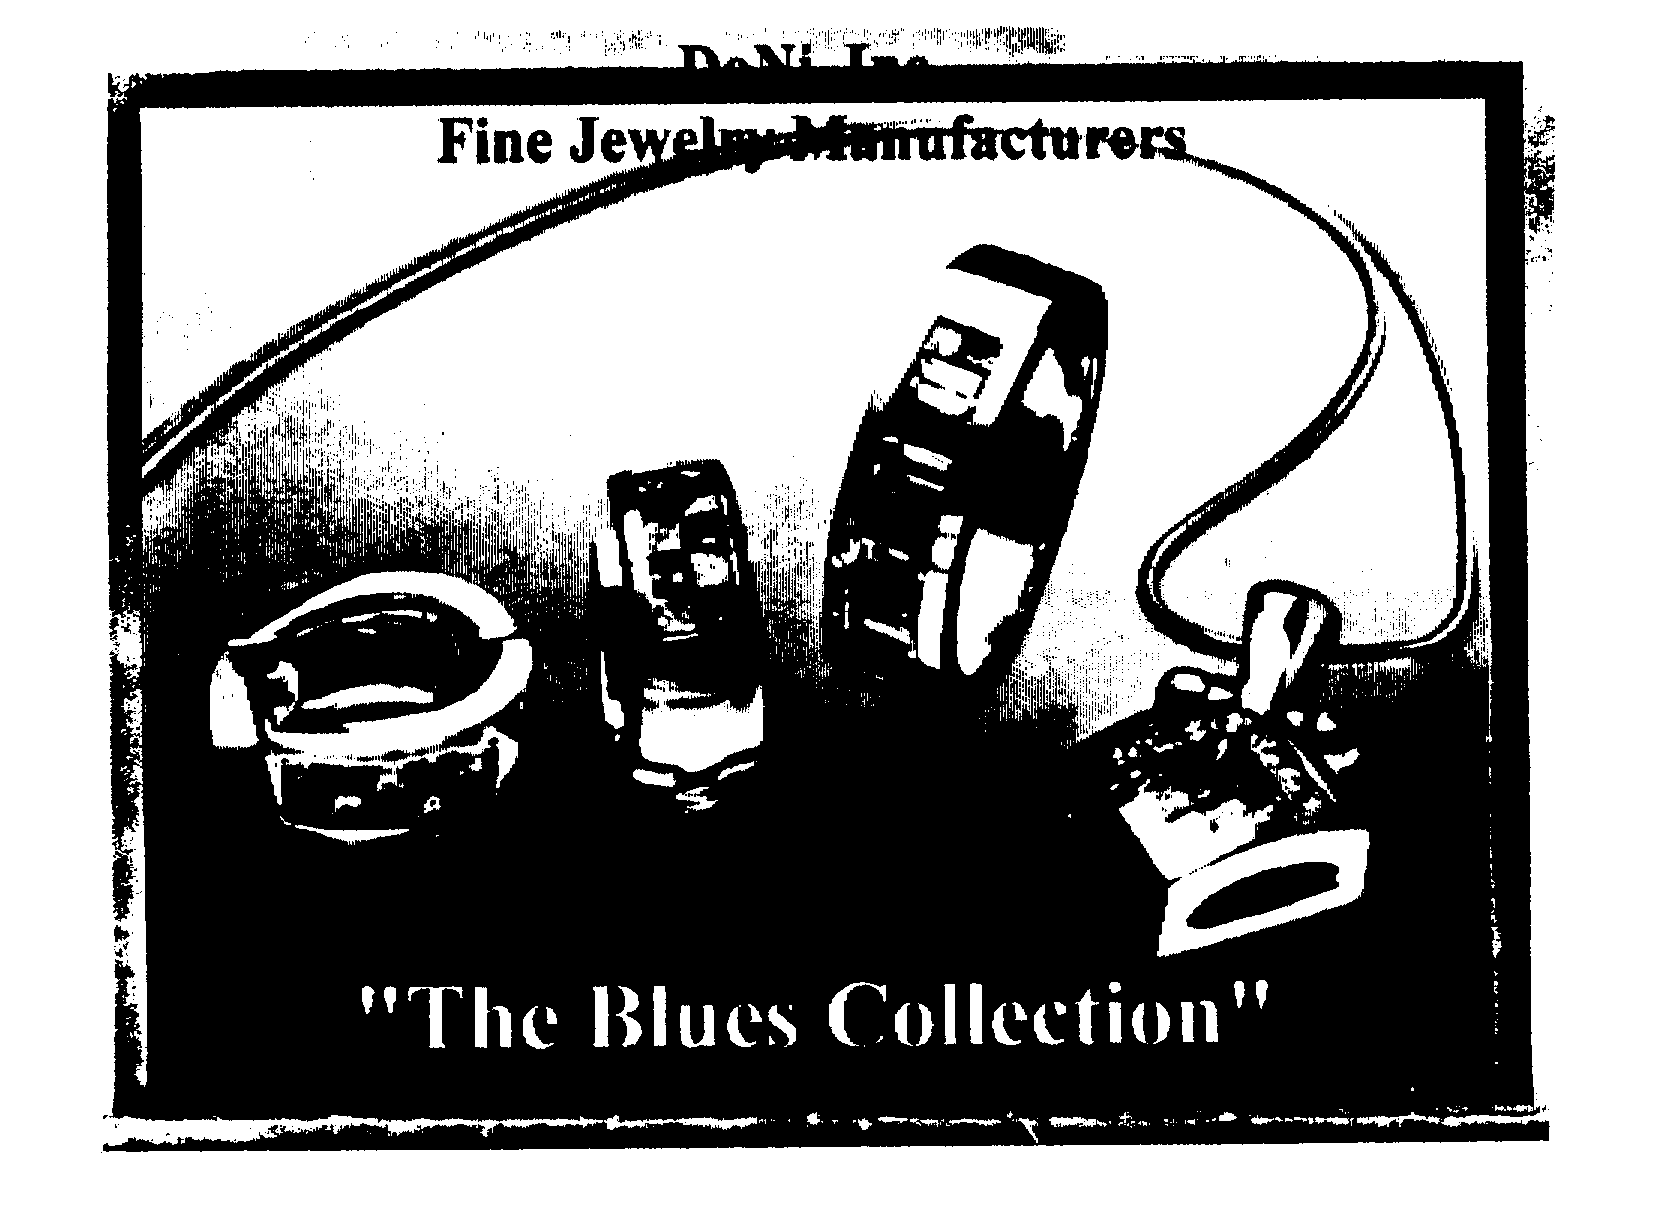  DONI, INC. FINE JEWELRY MANUFACTURERS "THE BLUES COLLECTION"